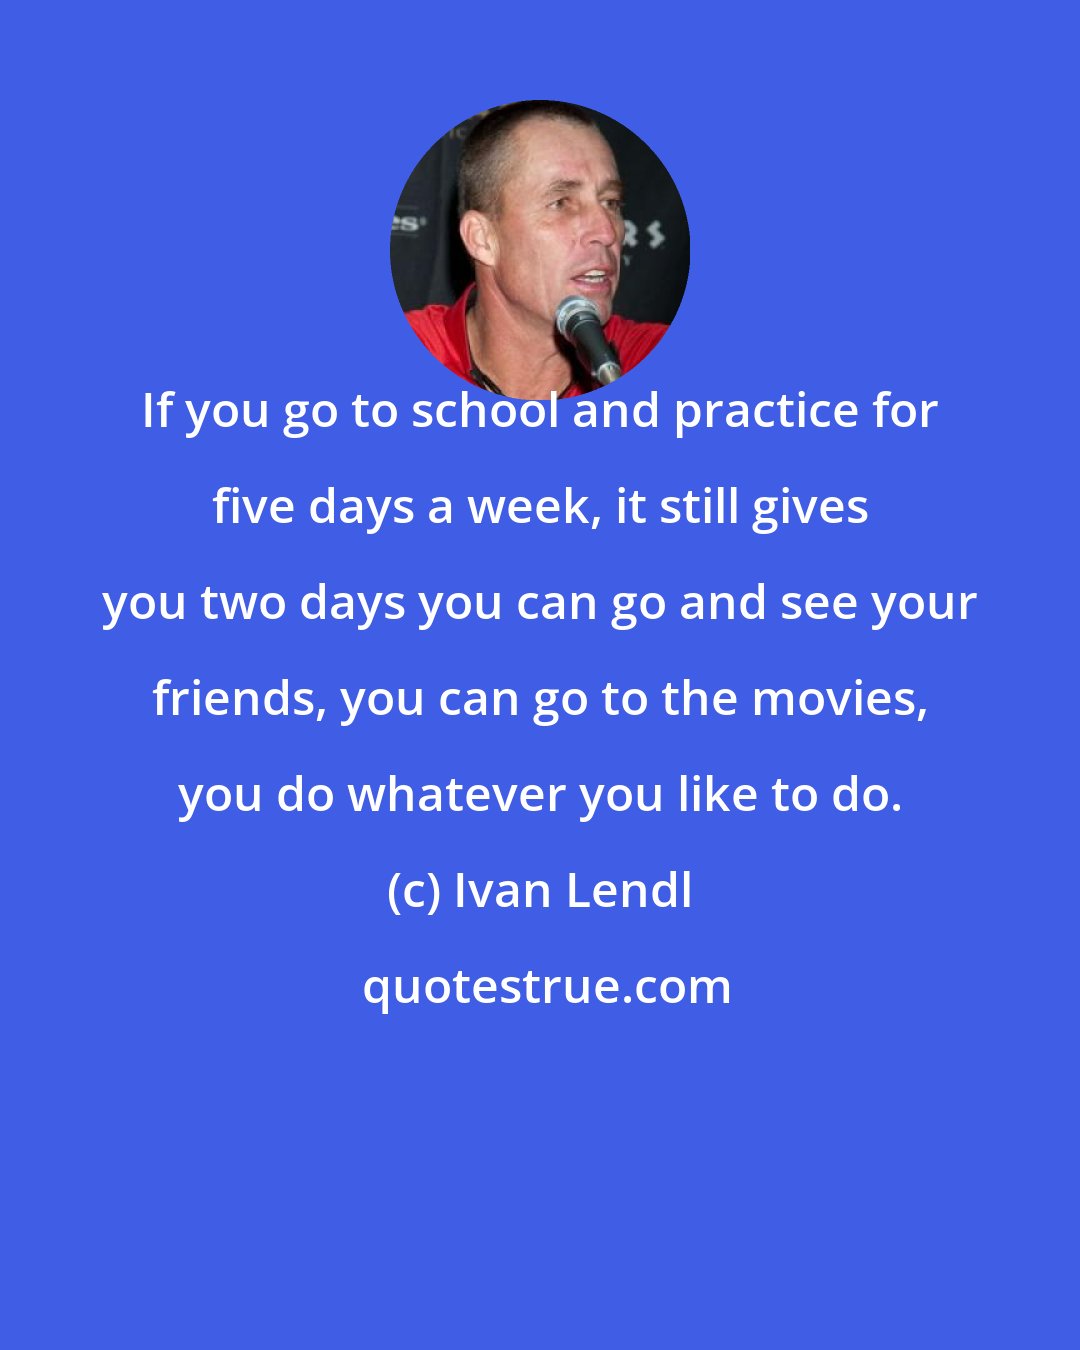 Ivan Lendl: If you go to school and practice for five days a week, it still gives you two days you can go and see your friends, you can go to the movies, you do whatever you like to do.